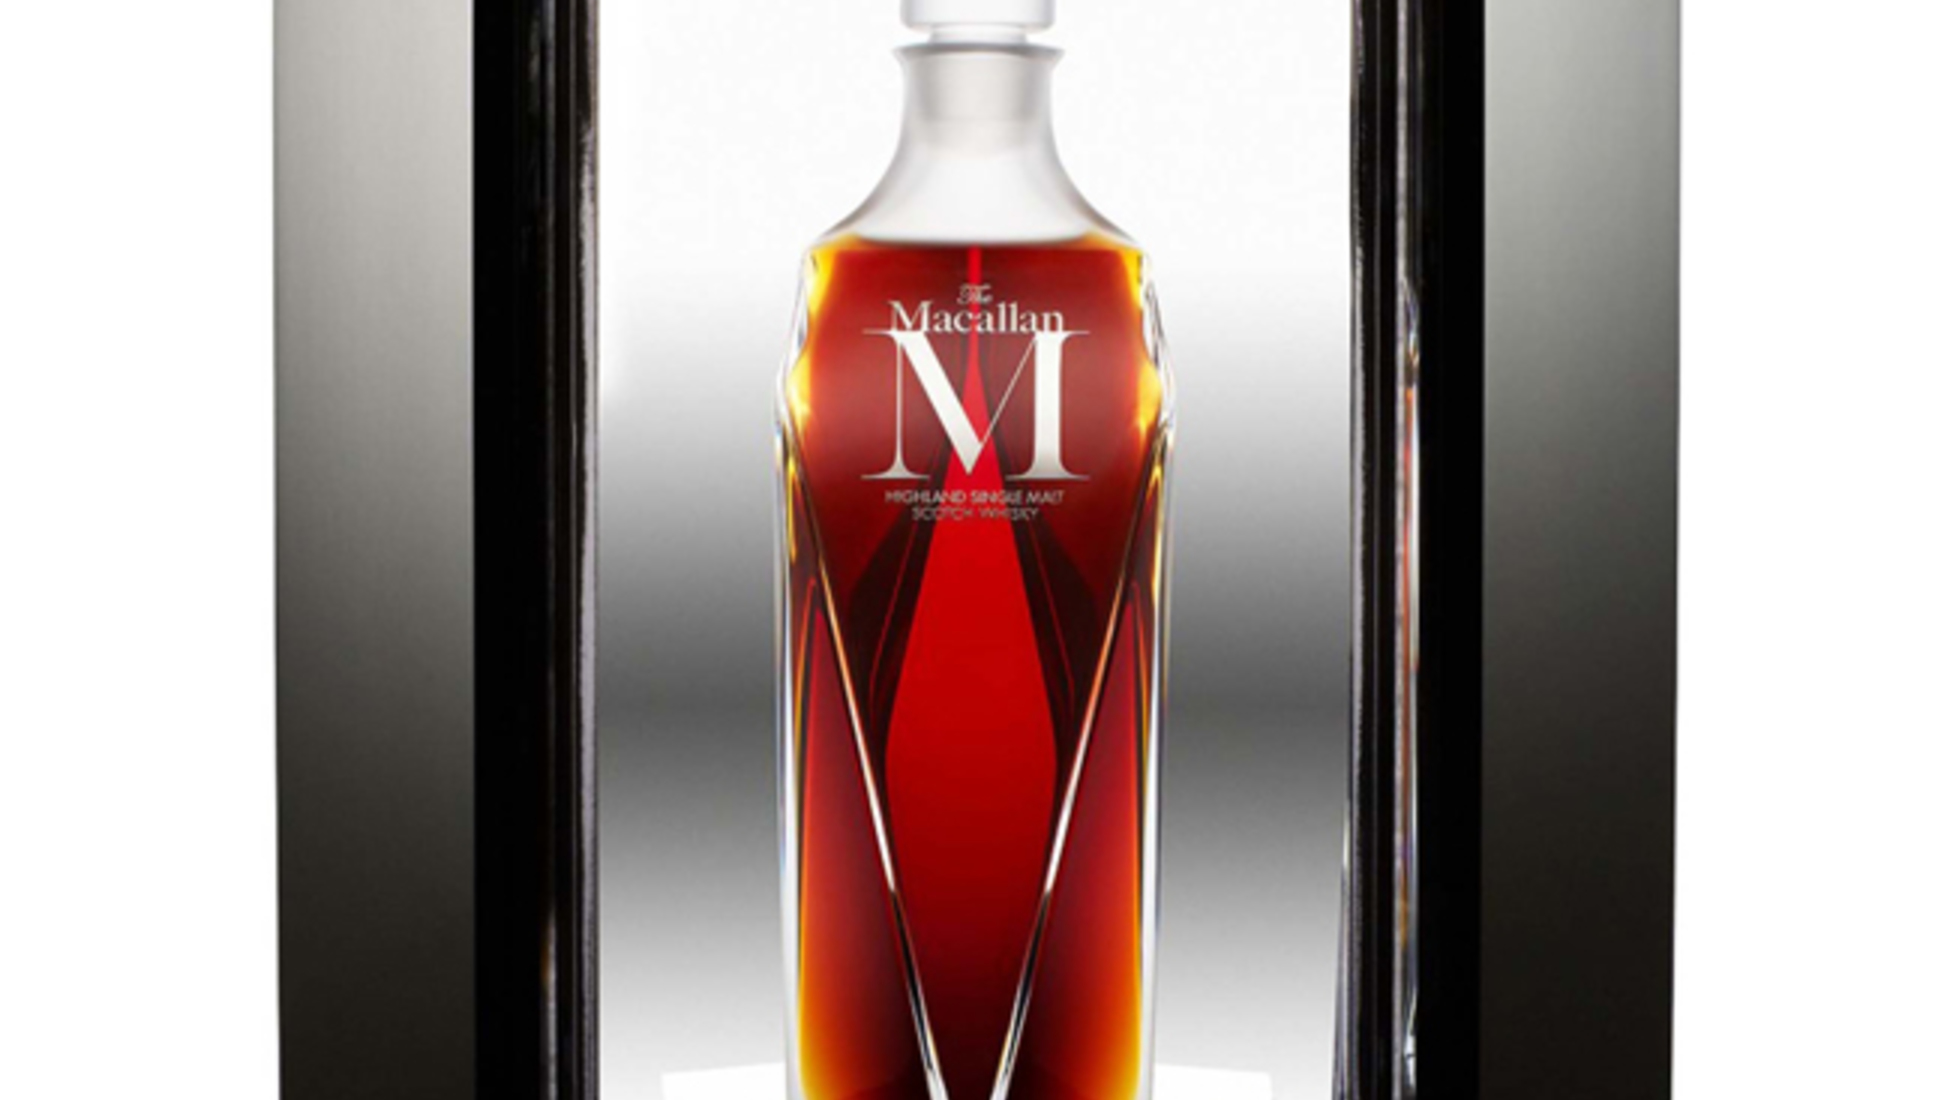 by far one of the most popular brand with whiskey investors in 2022 - 2023